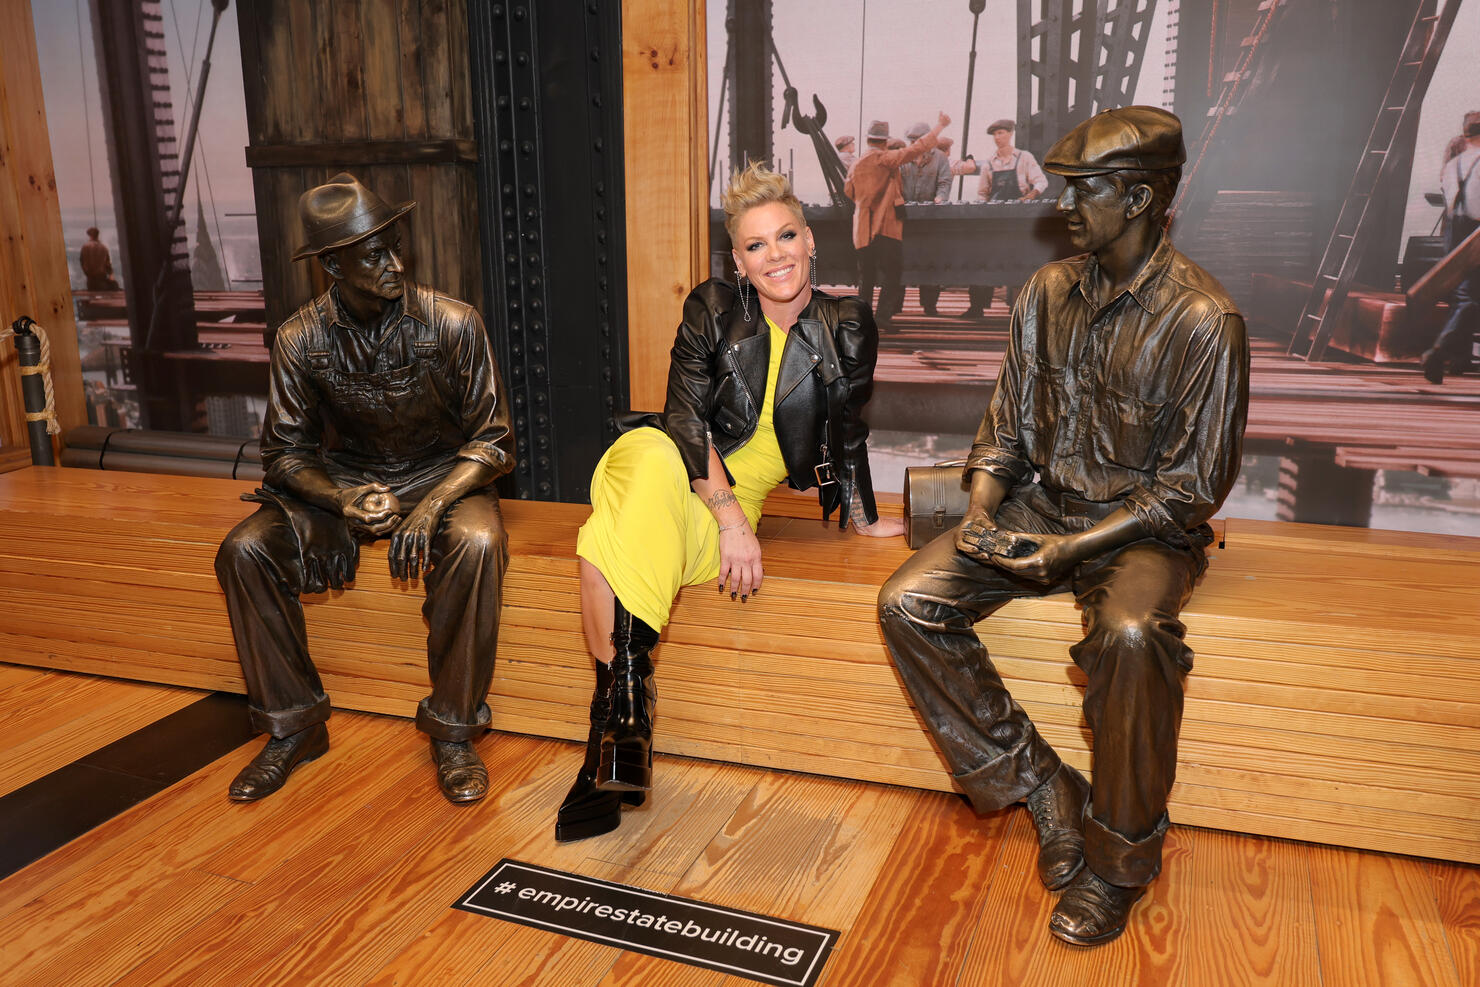 P!nk Visits The Empire State Building